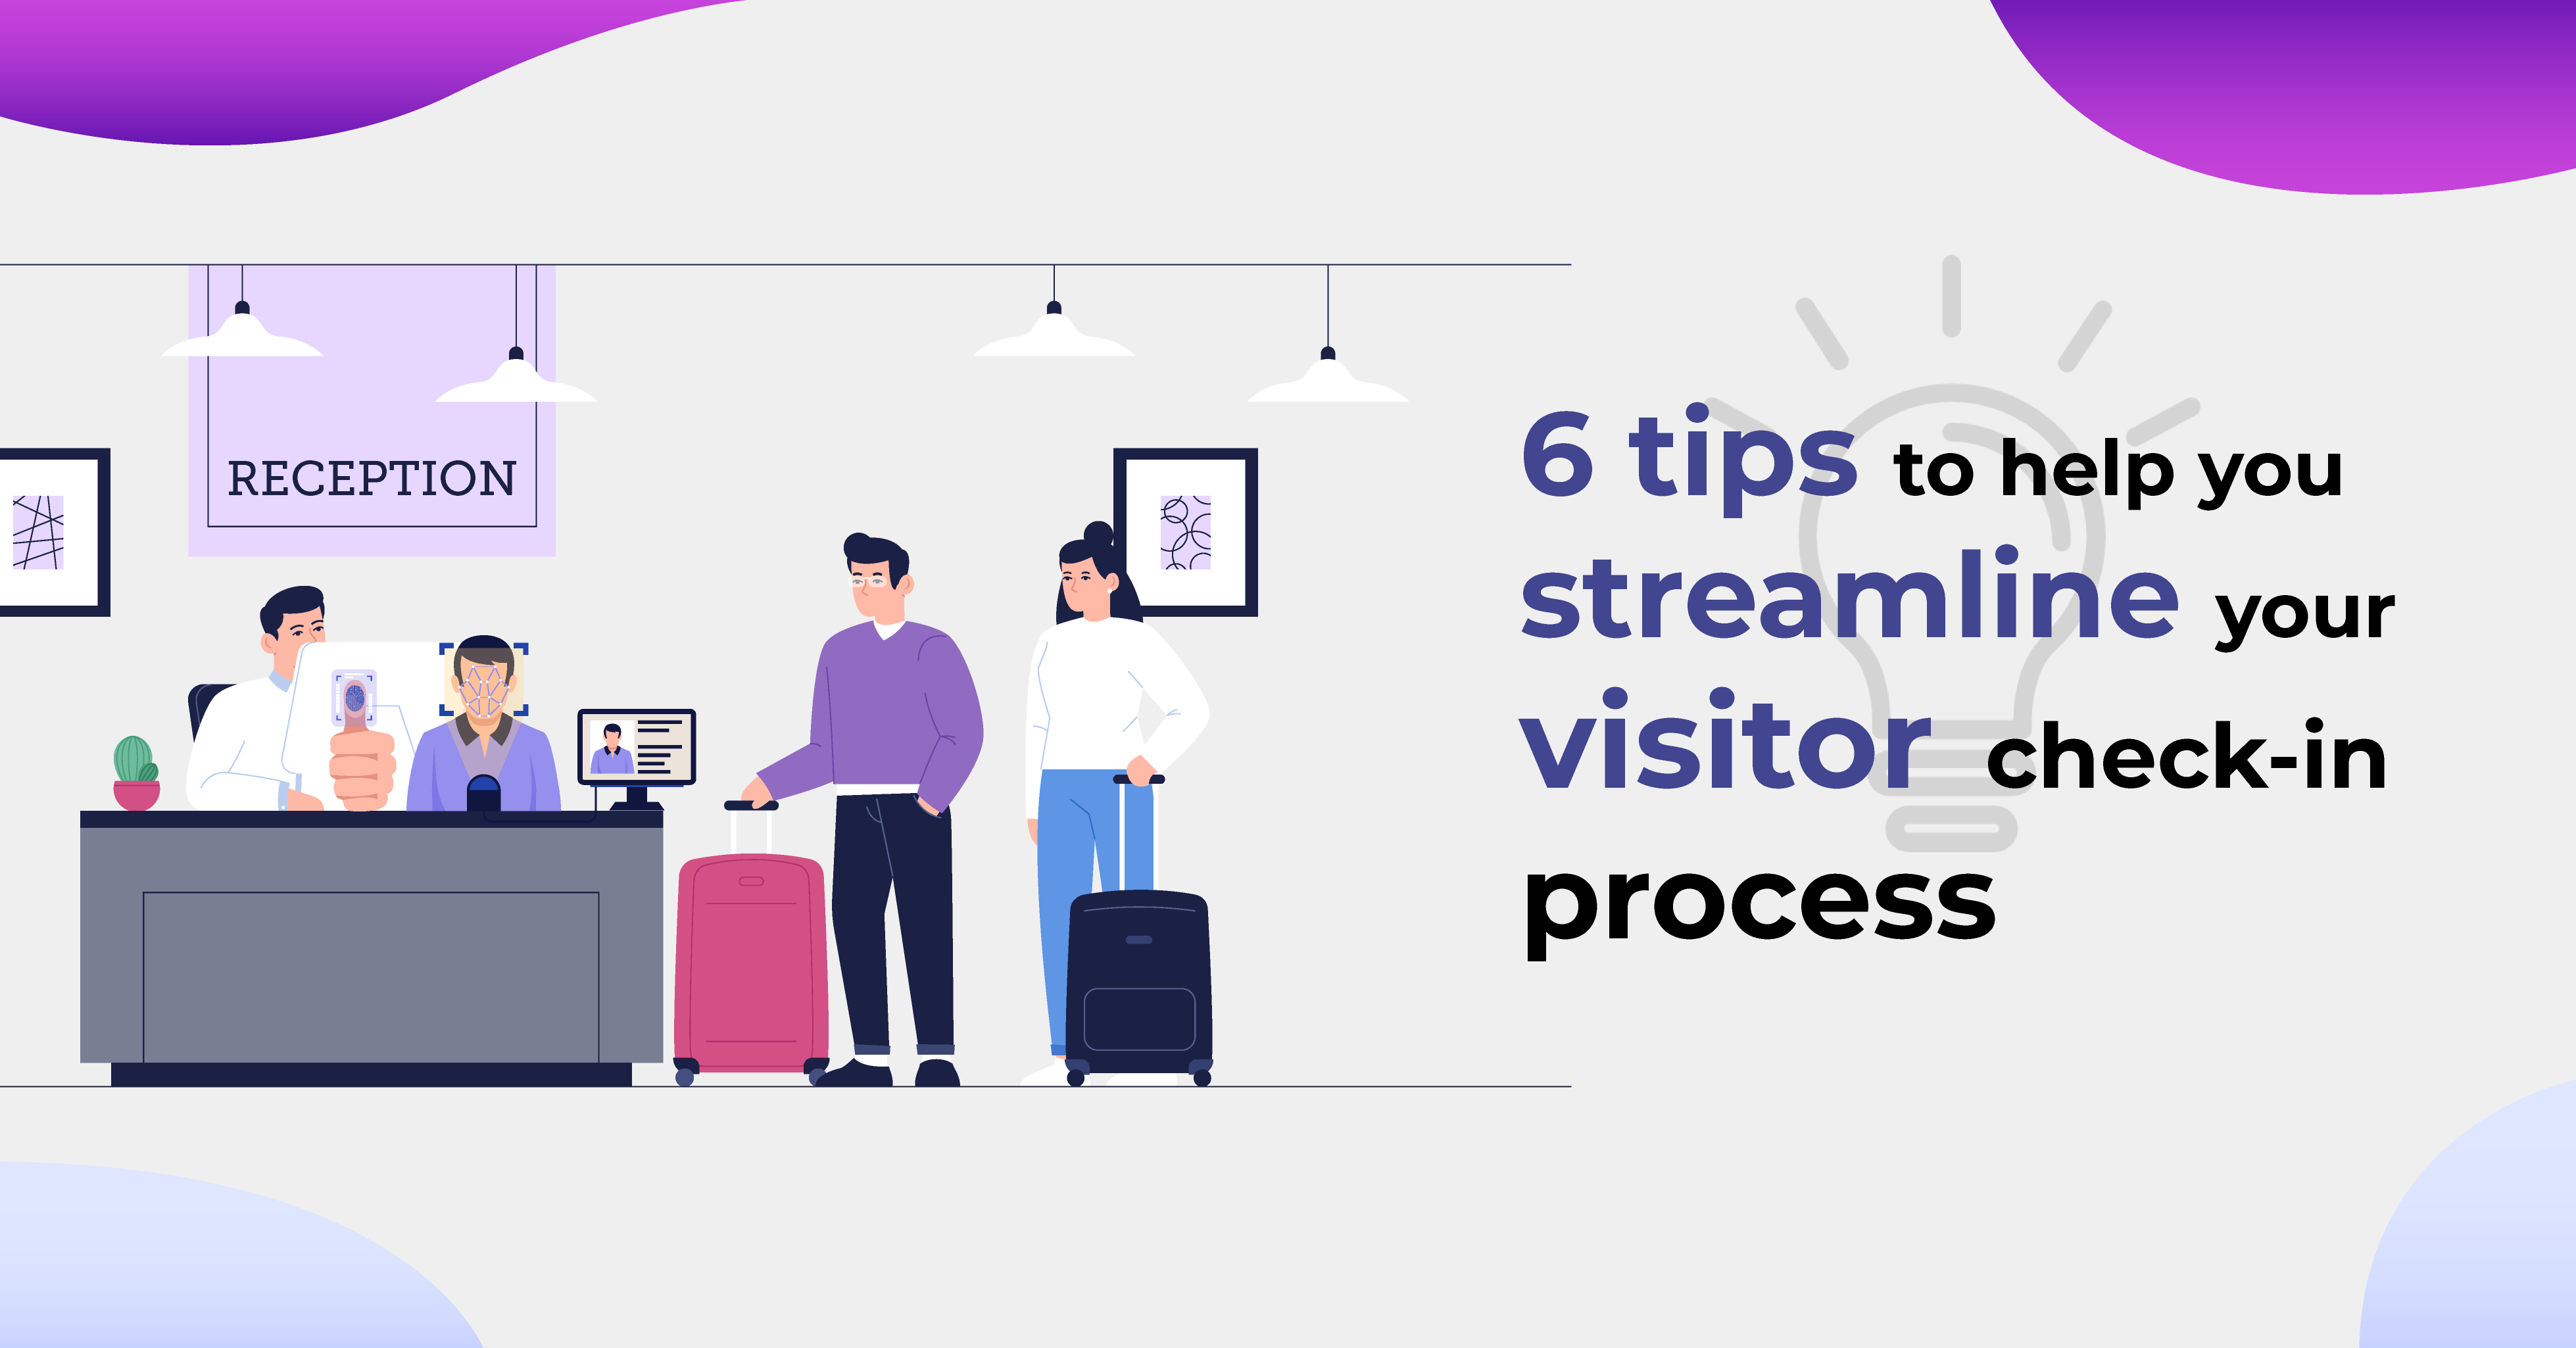 6 tips to help you streamline your visitor check-in process